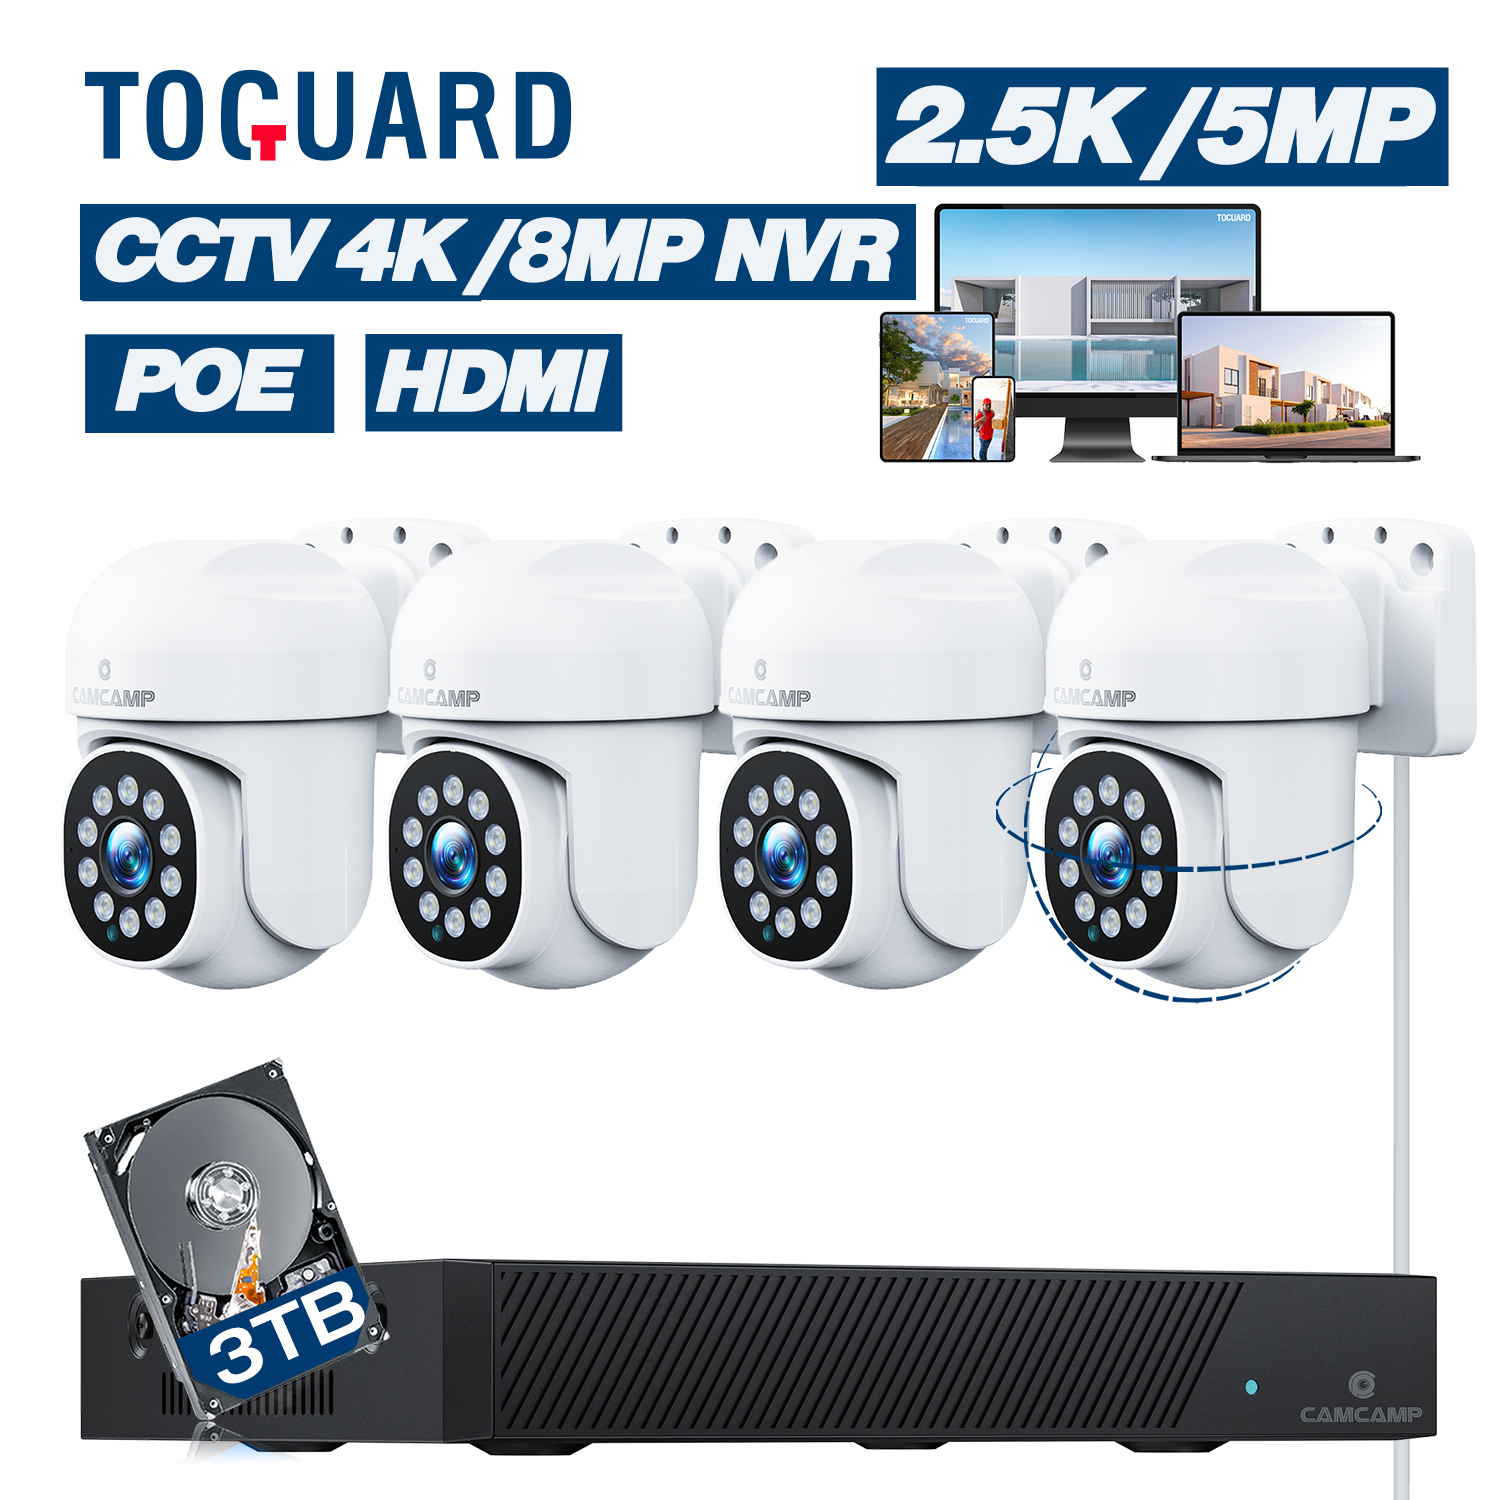 TOGUARD SC36 5MP POE Security Camera System Outdoor with 4K 8CH Expandable CCTV NVR 4Pcs 2.5K PTZ Dome Surveillance Cameras 3TB Hard Drive HDMI Connector - image 1 of 10